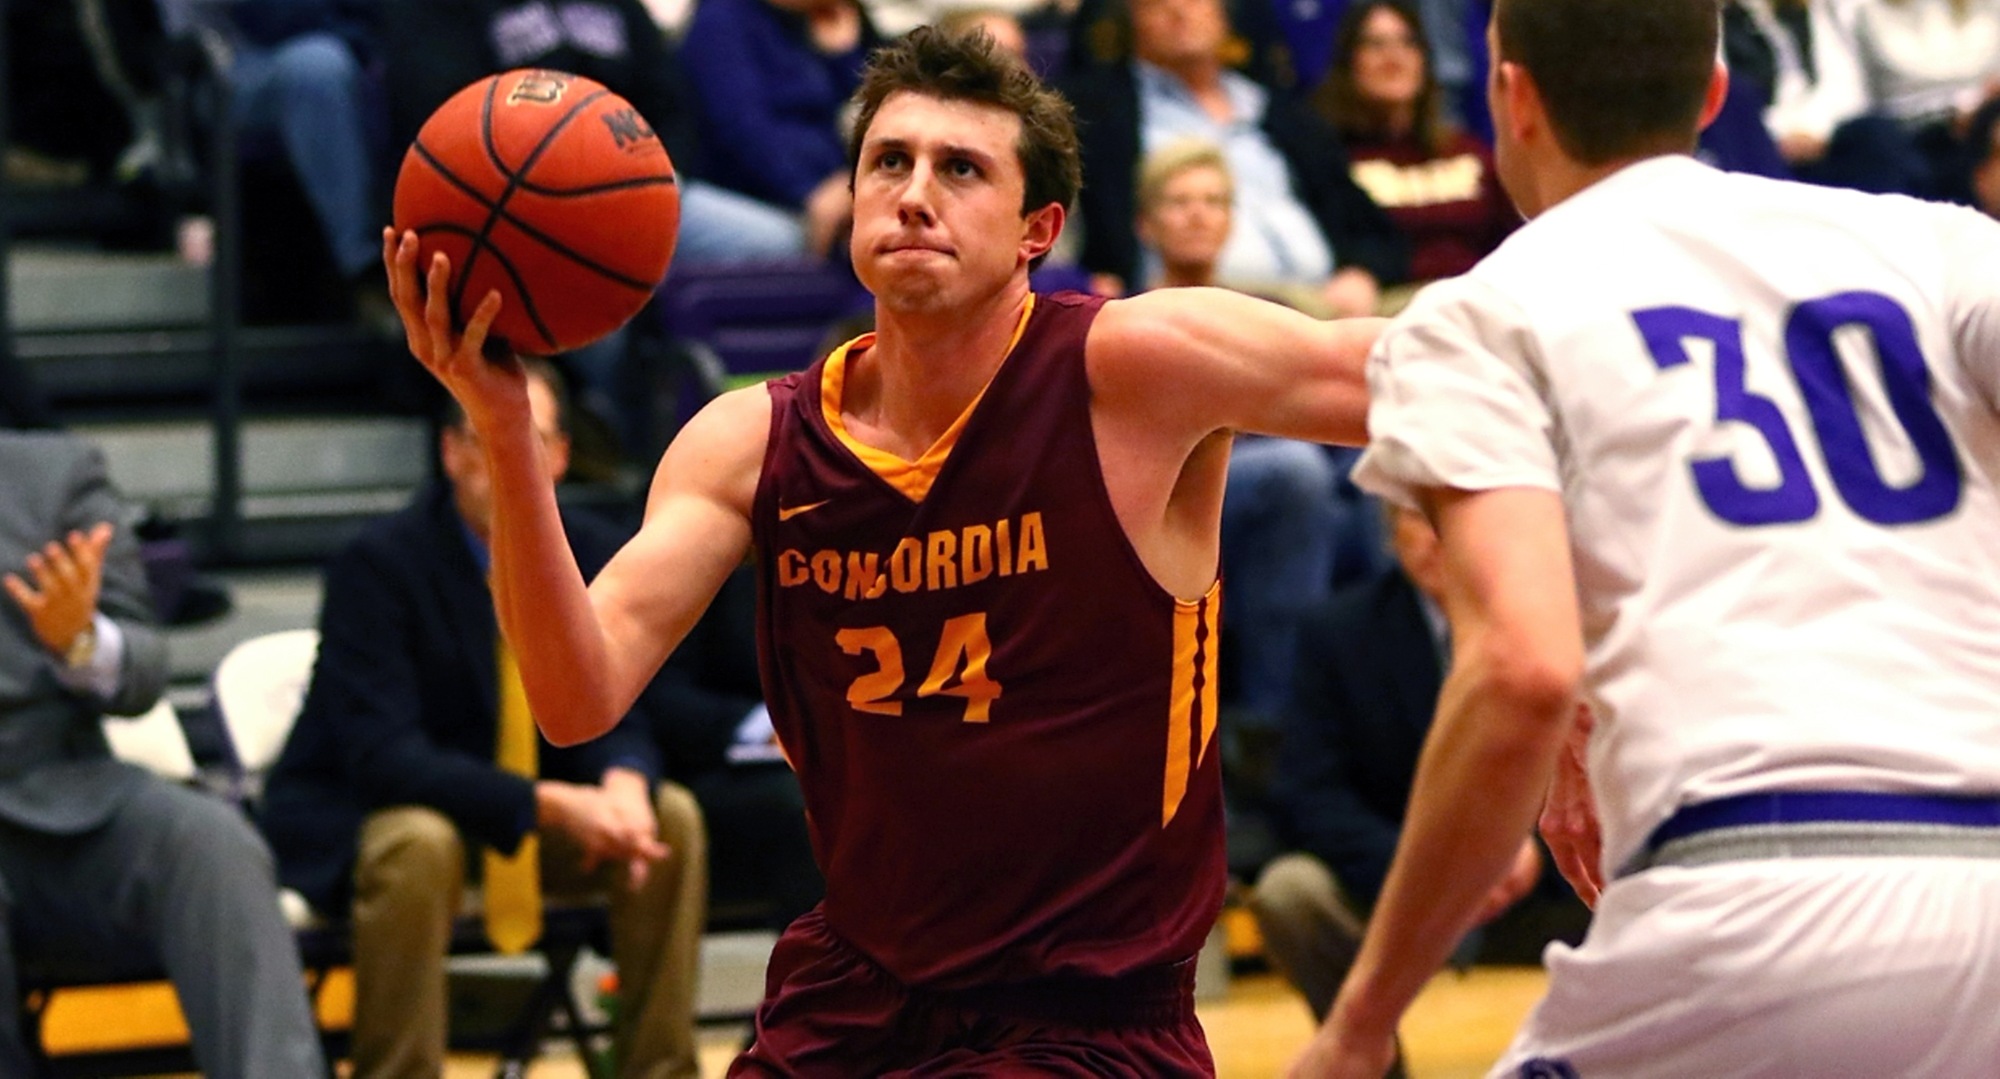 Senior Austin Nelson drives to the basket for two of his team-high 13 points in the Cobbers' game at St. Thomas (Photo courtesy of Ryan Coleman, d3photography.com)